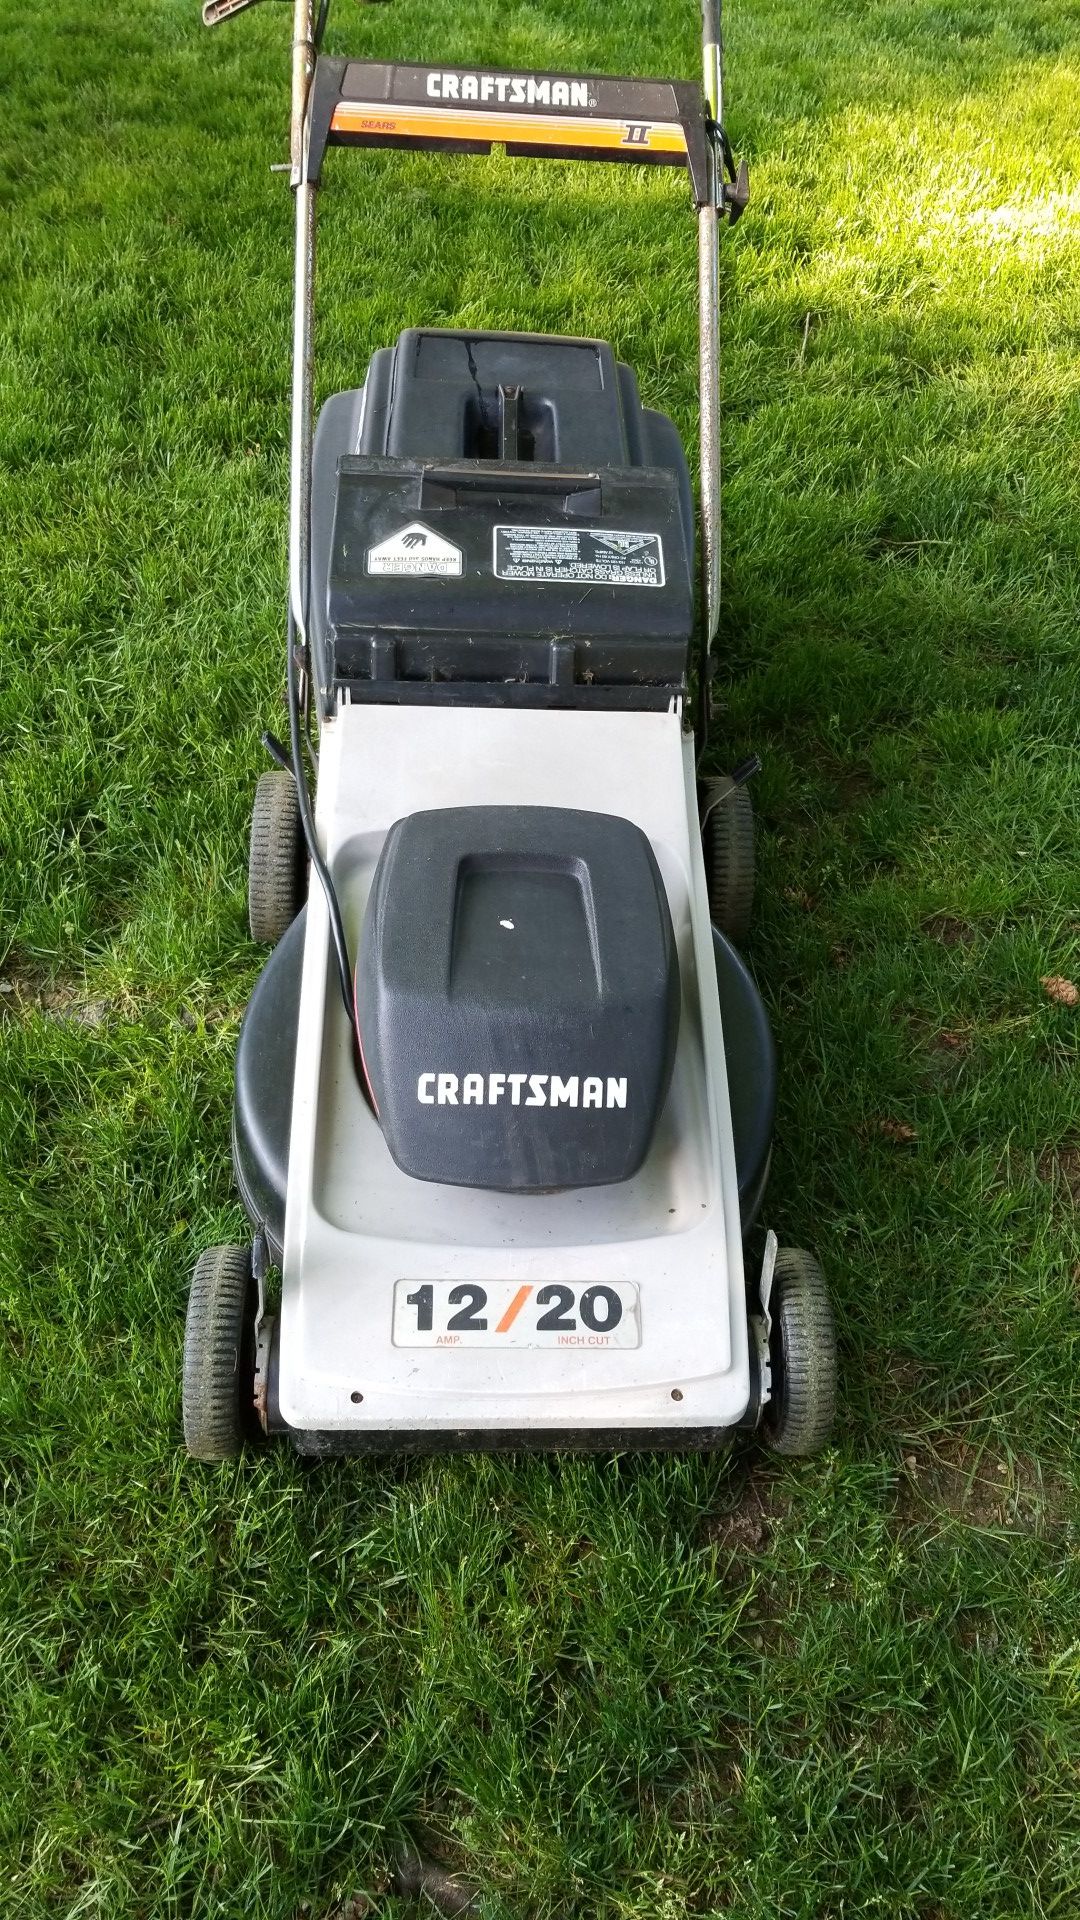 Craftsman electric corded lawnmower with bag.